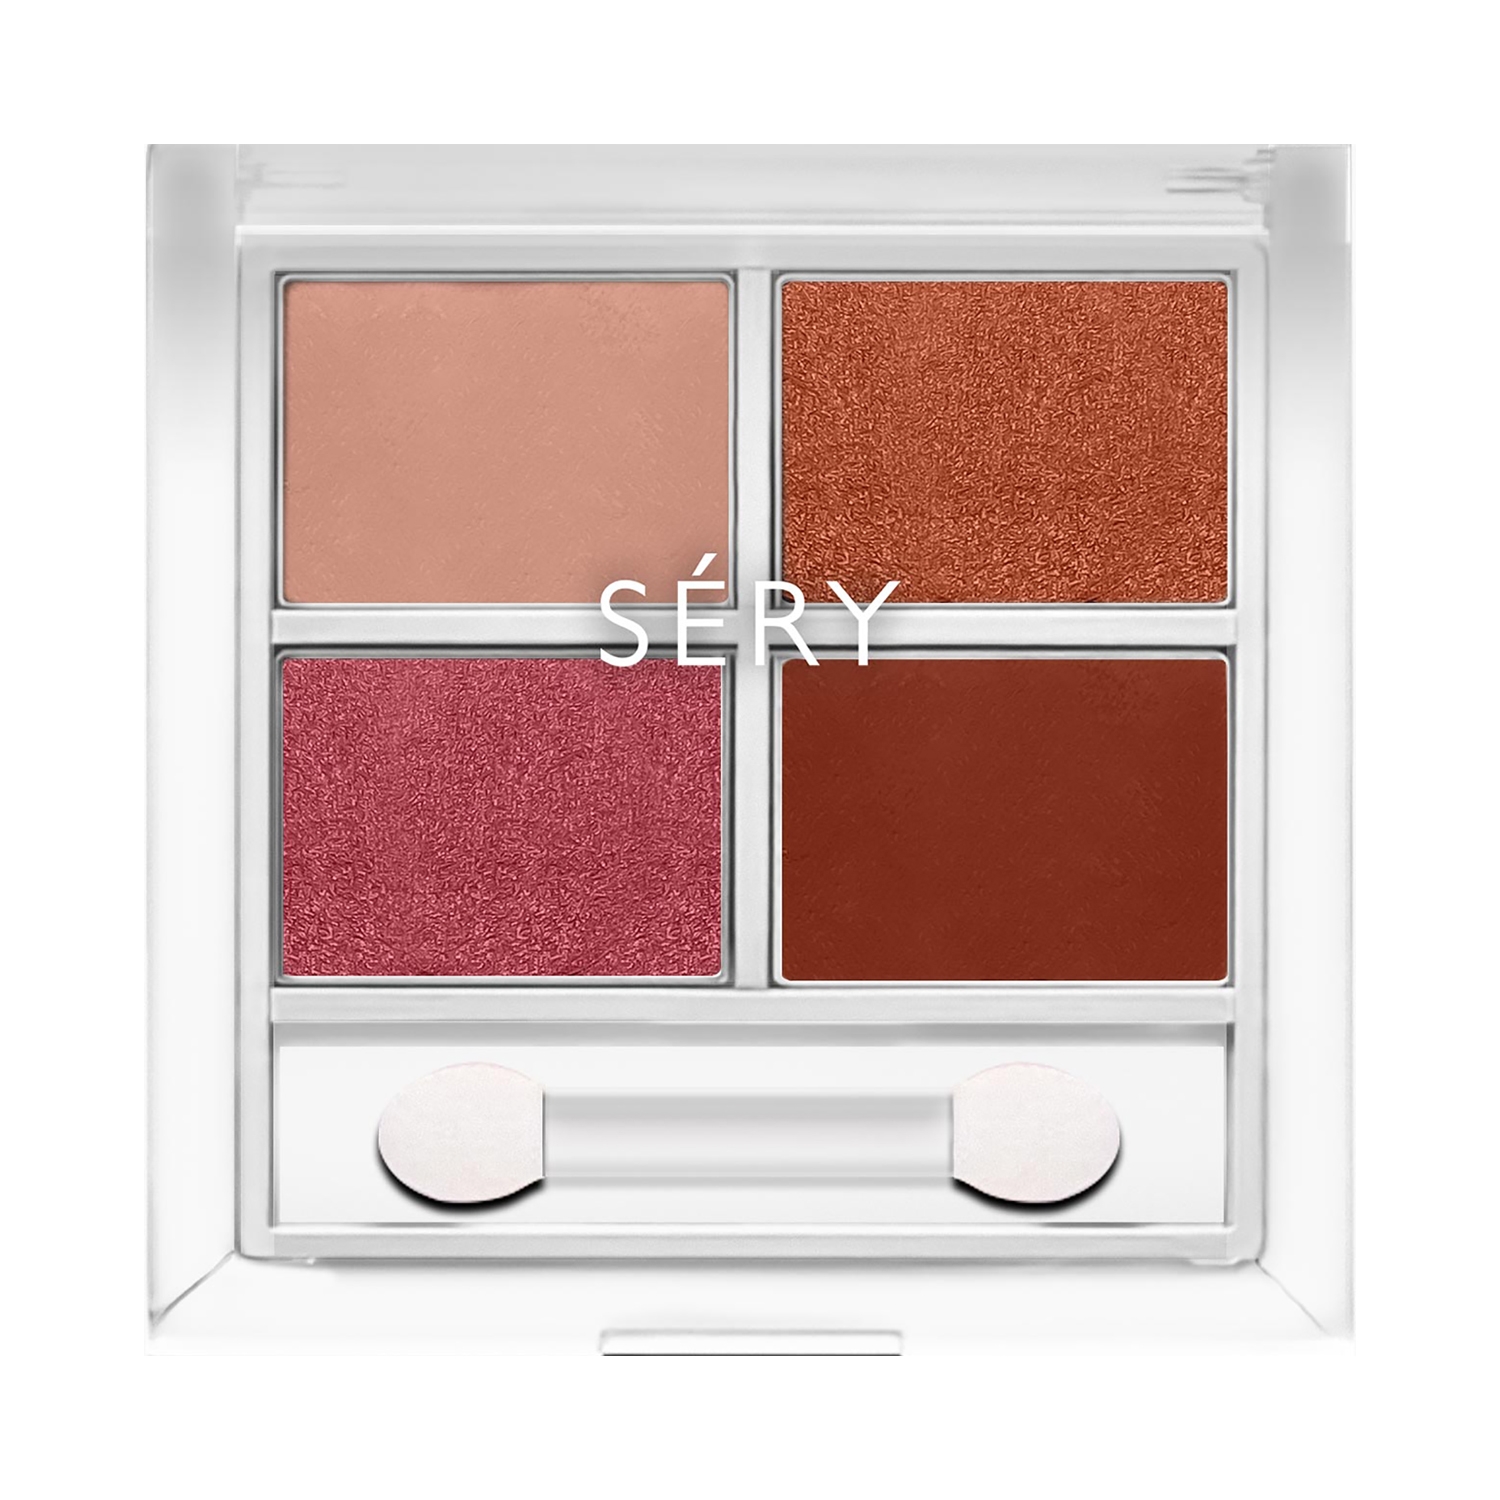 Sery | Sery Day To Night Eye Shadow Palette - Dress Me Up (7.2g)